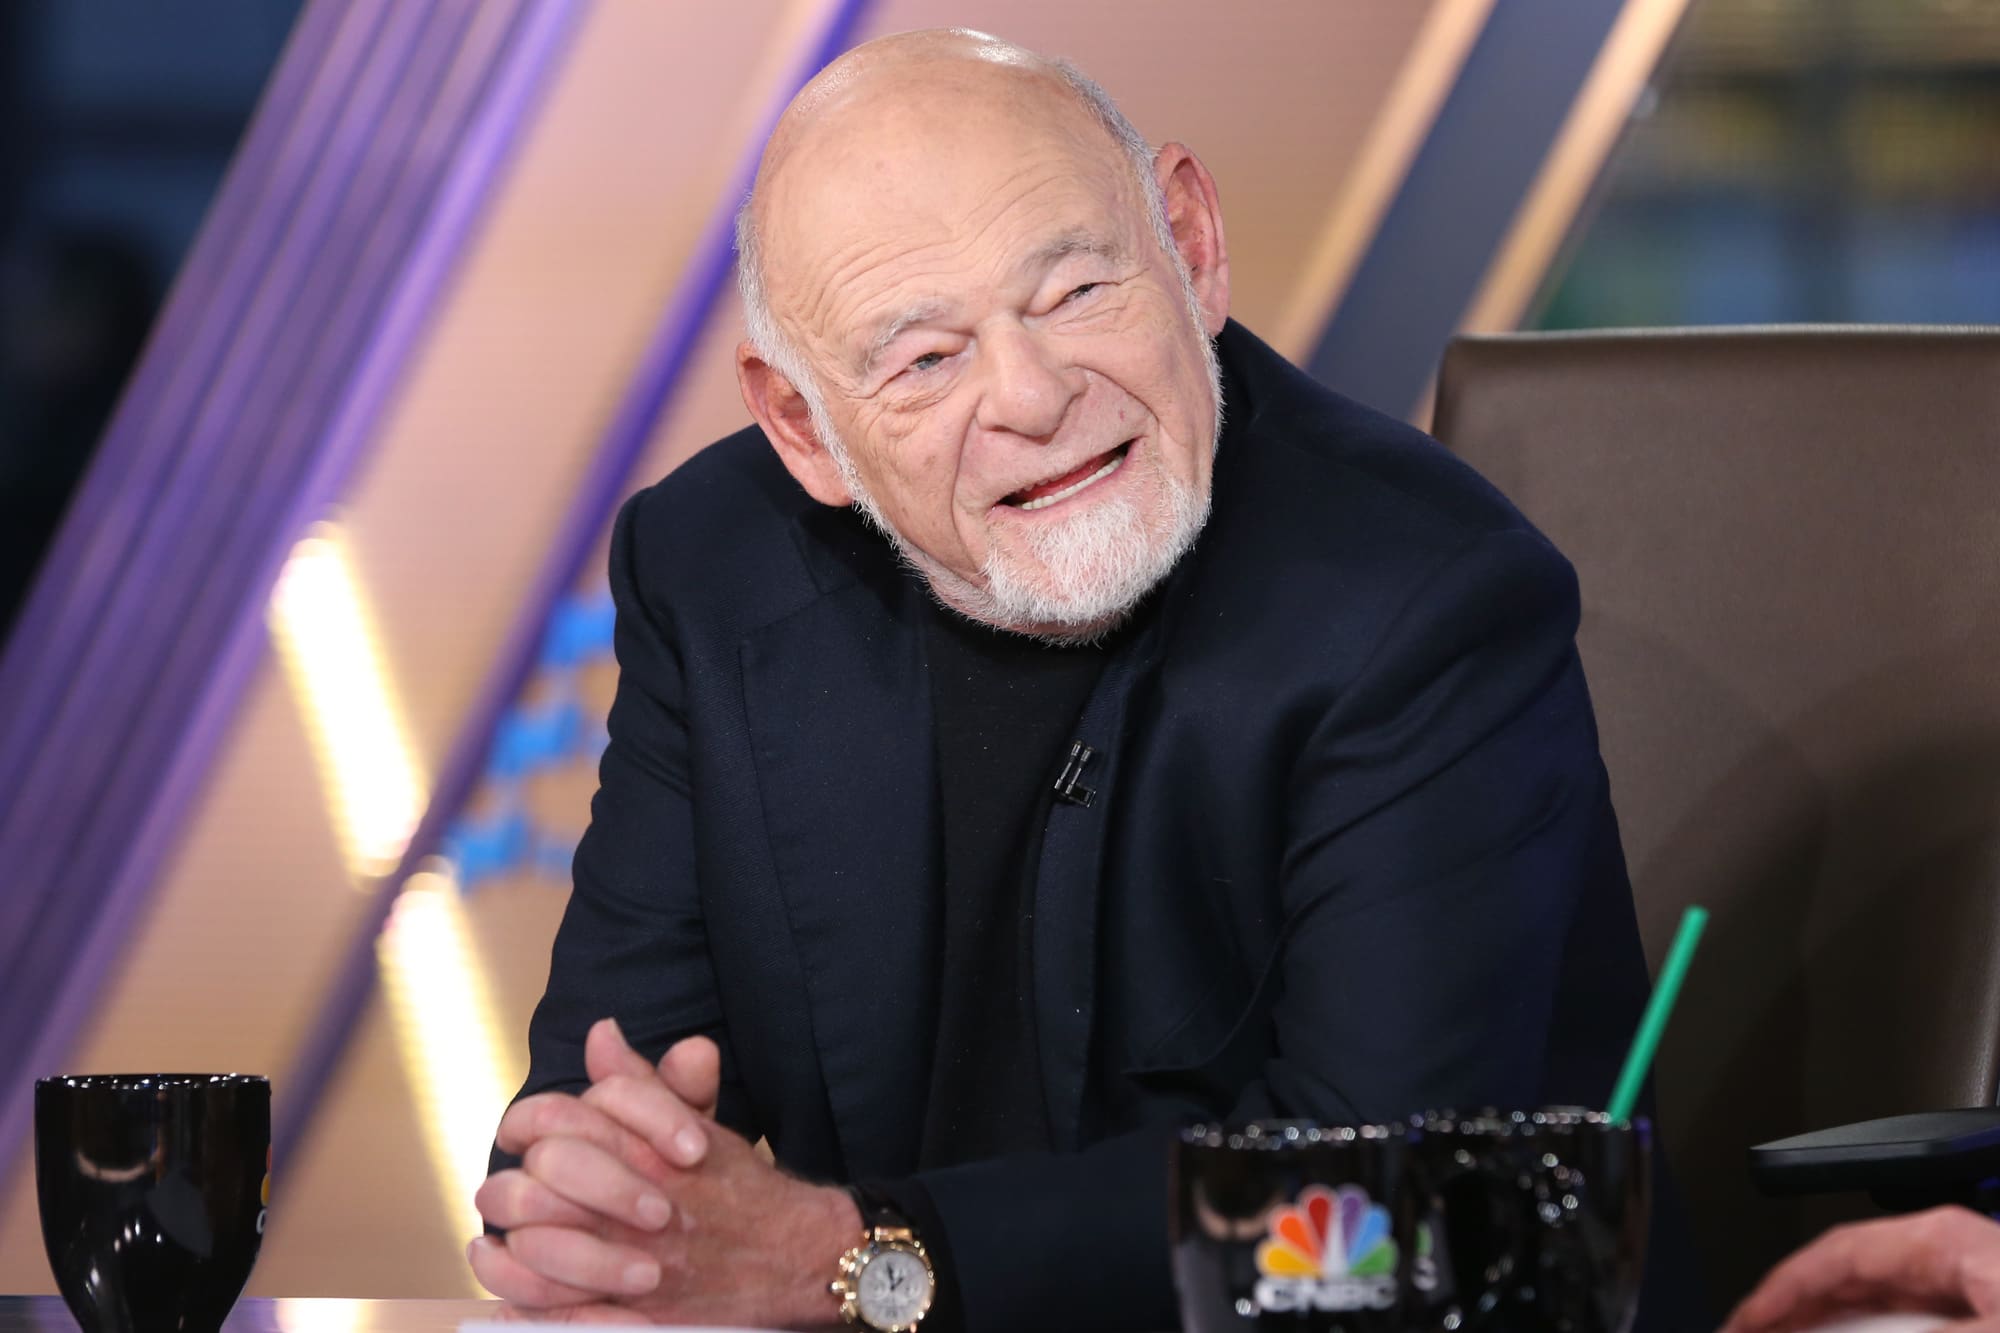 Sam Zell calls SPAC craze largely ‘rampant hypothesis’ paying homage to 1990s dot-com bubble